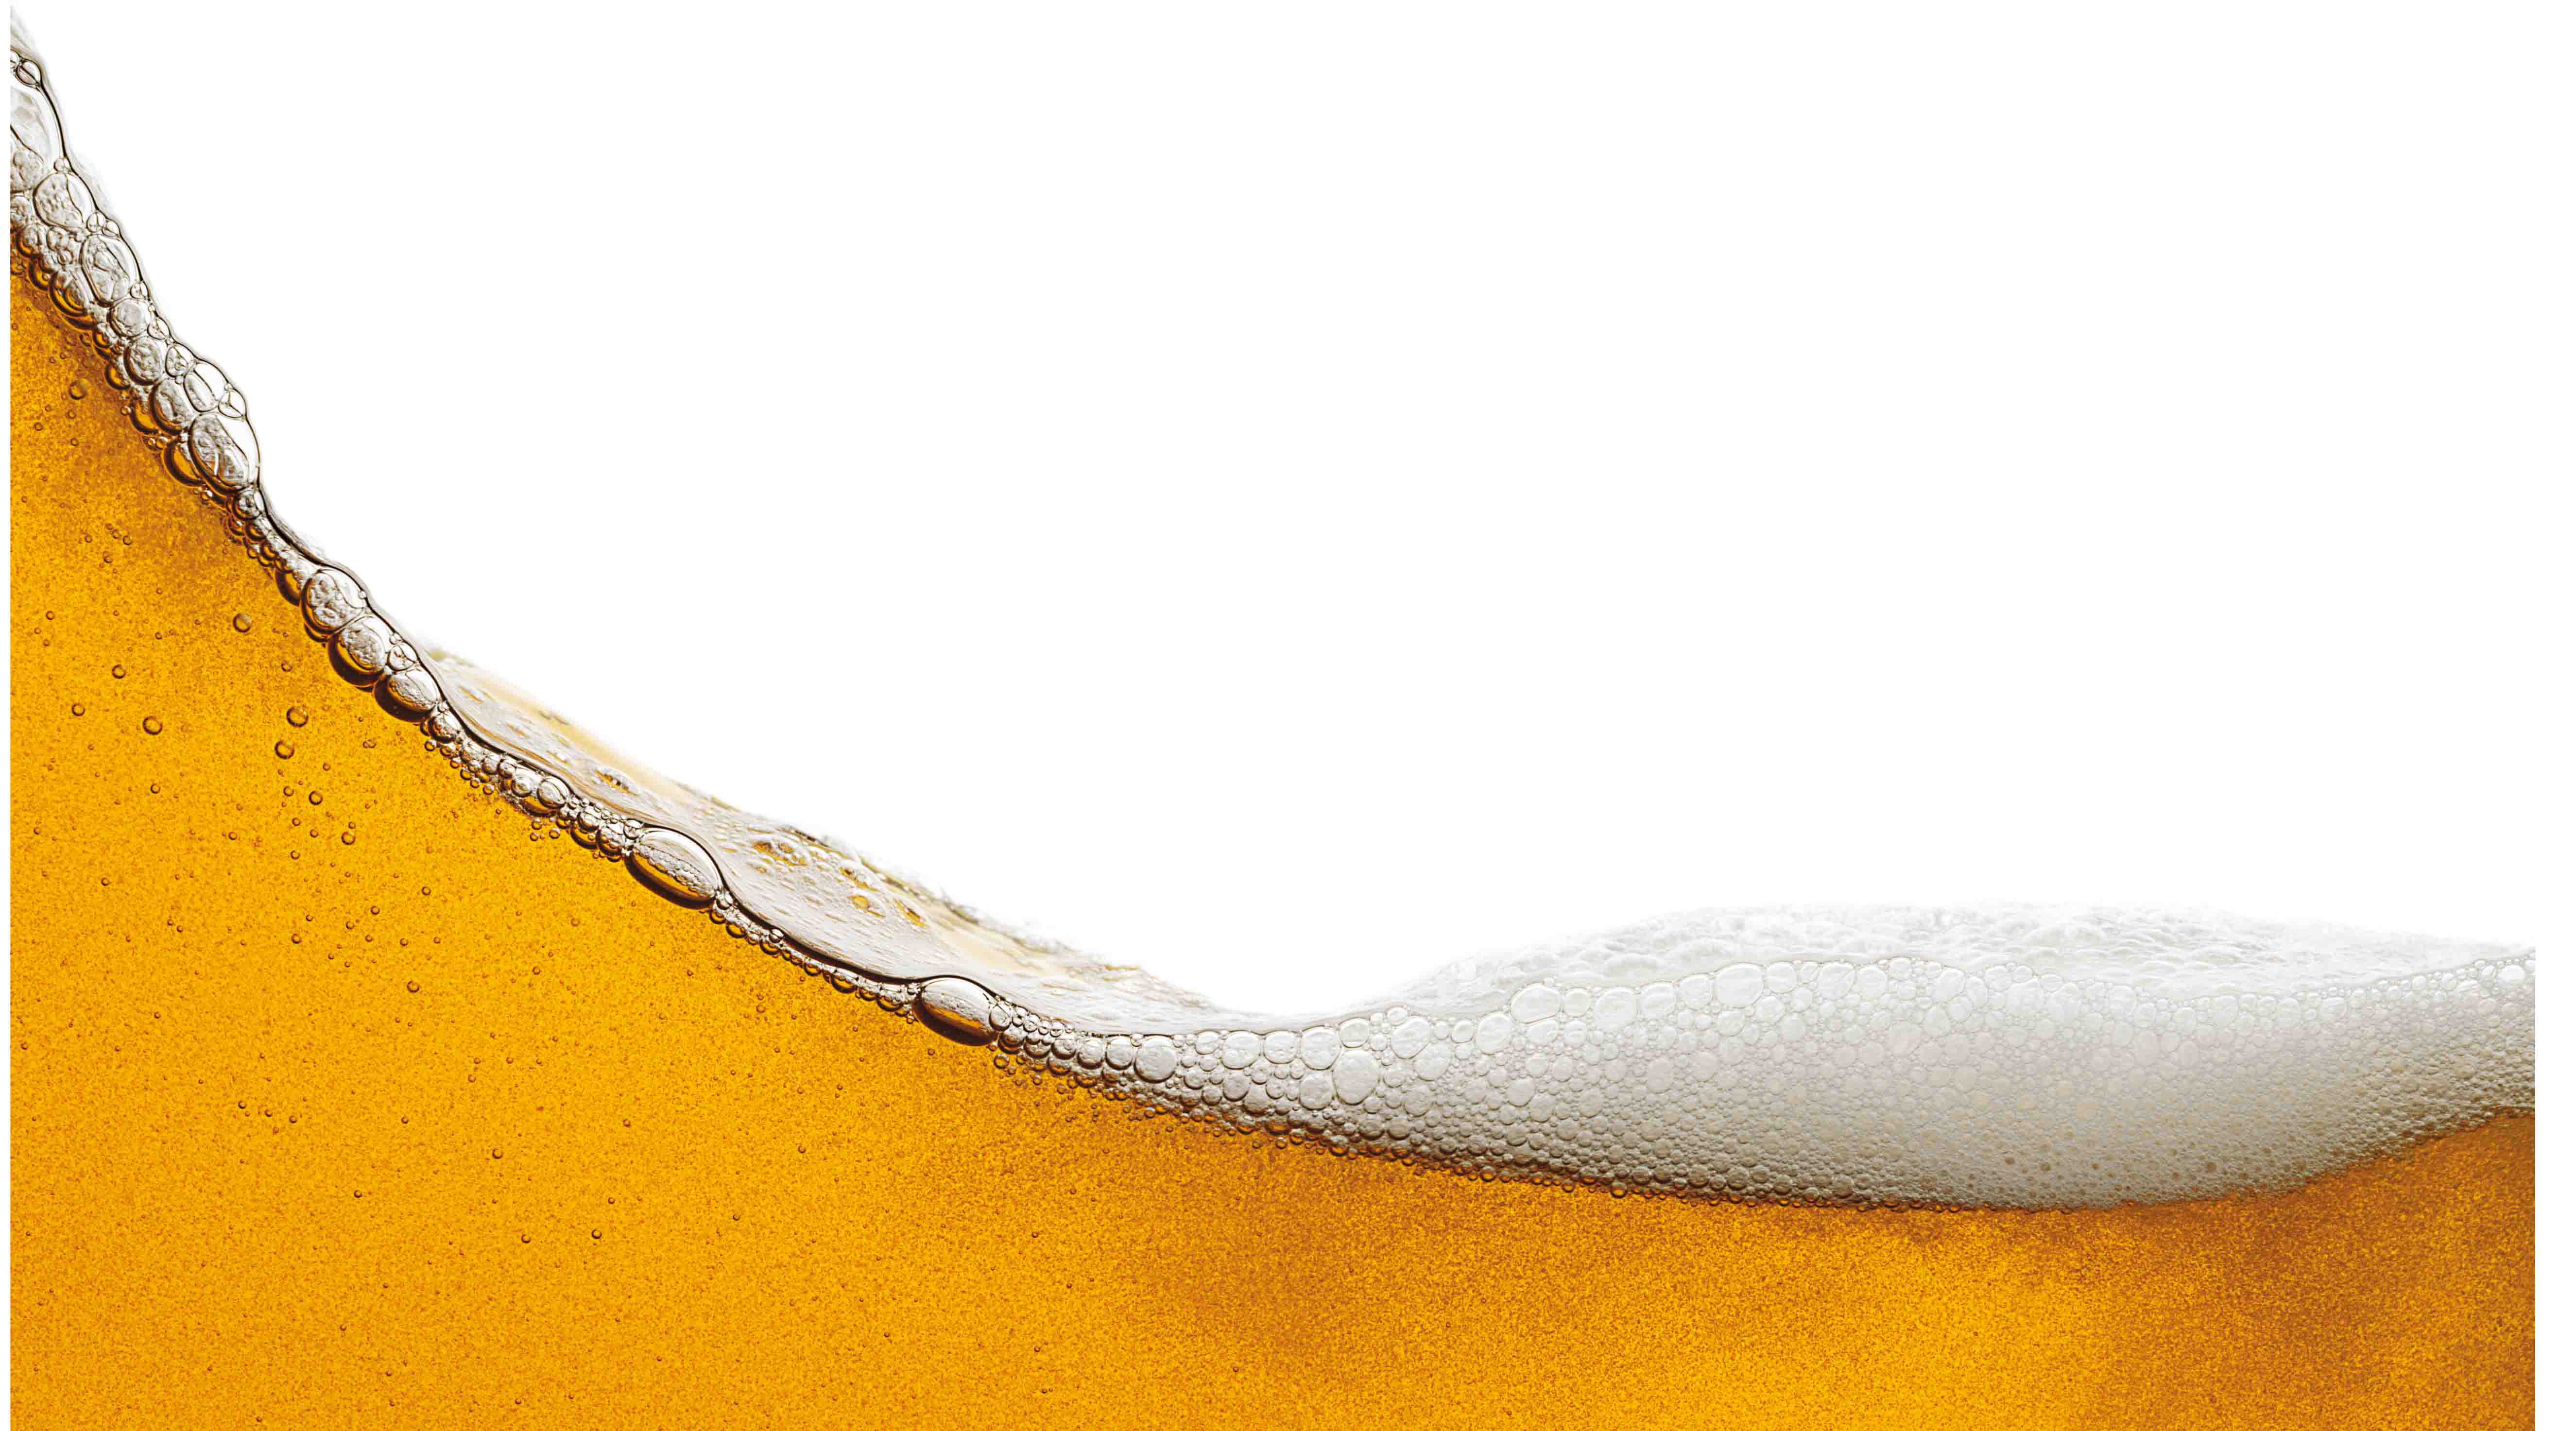 Decline in beer consumption continues as consumption patterns change and evolve, with this linked to an increasing consumer focus on health and wellness as well as the impact of high levels of excise duties on unit prices, stated Euromonitor.